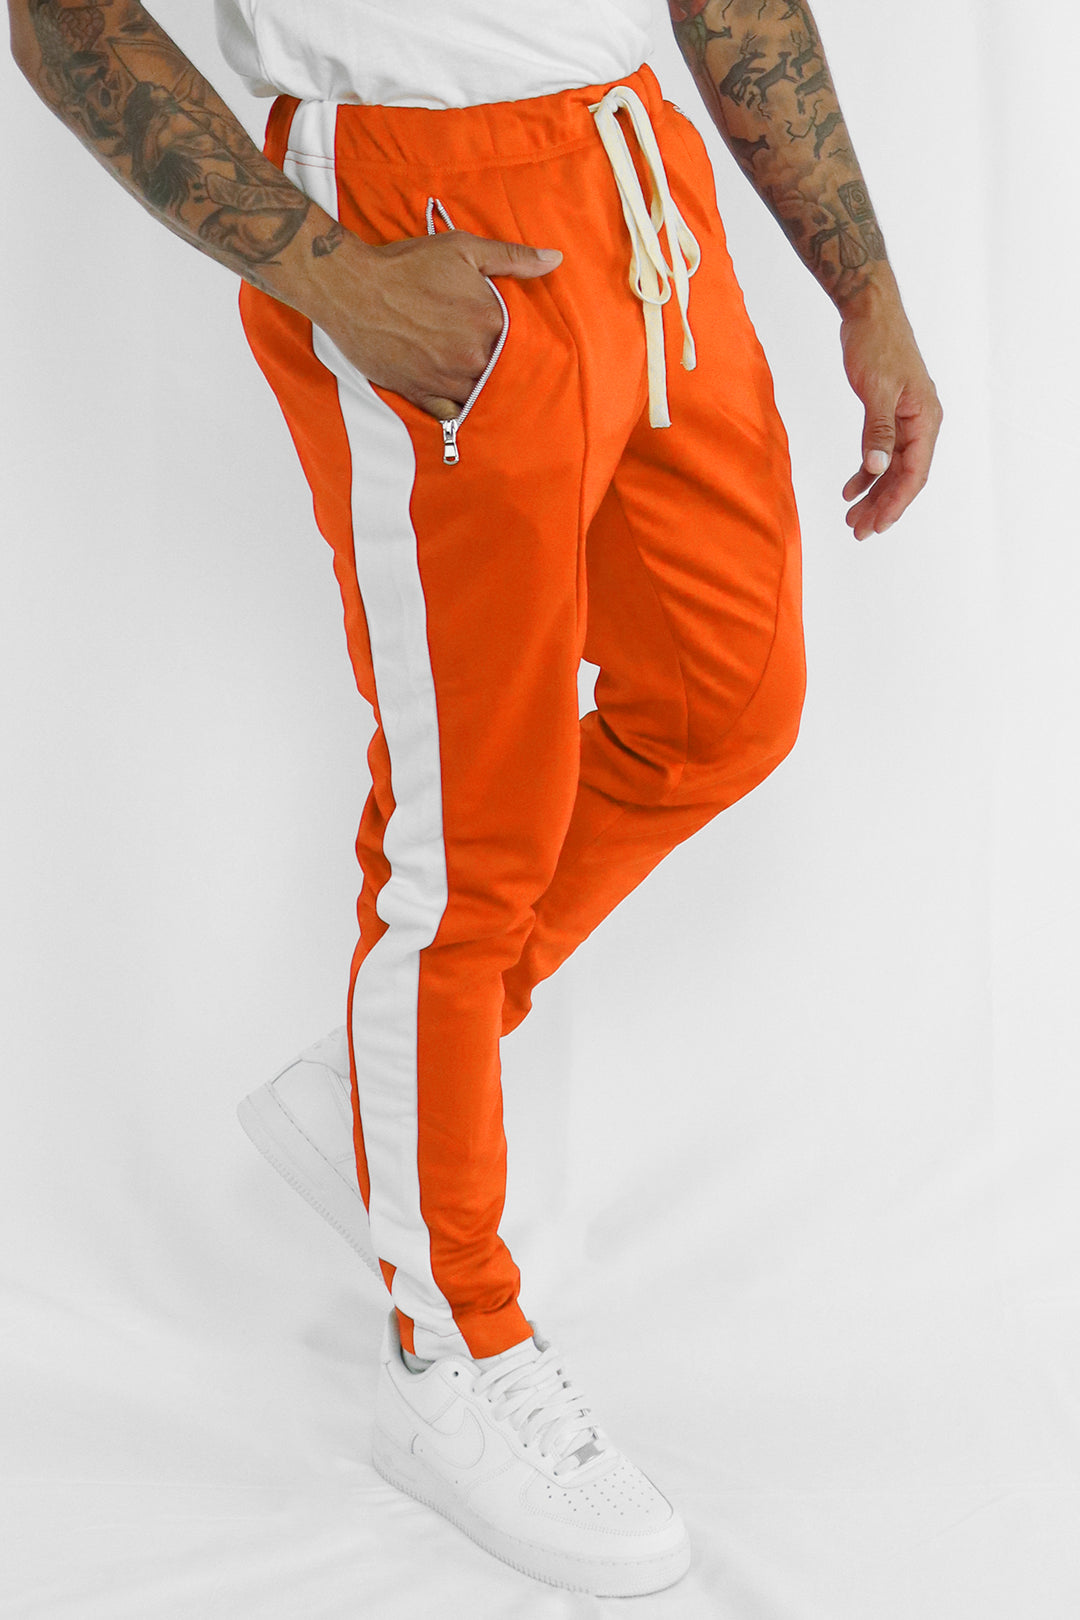 Premium Photo  A group of people wearing orange sweatpants stand